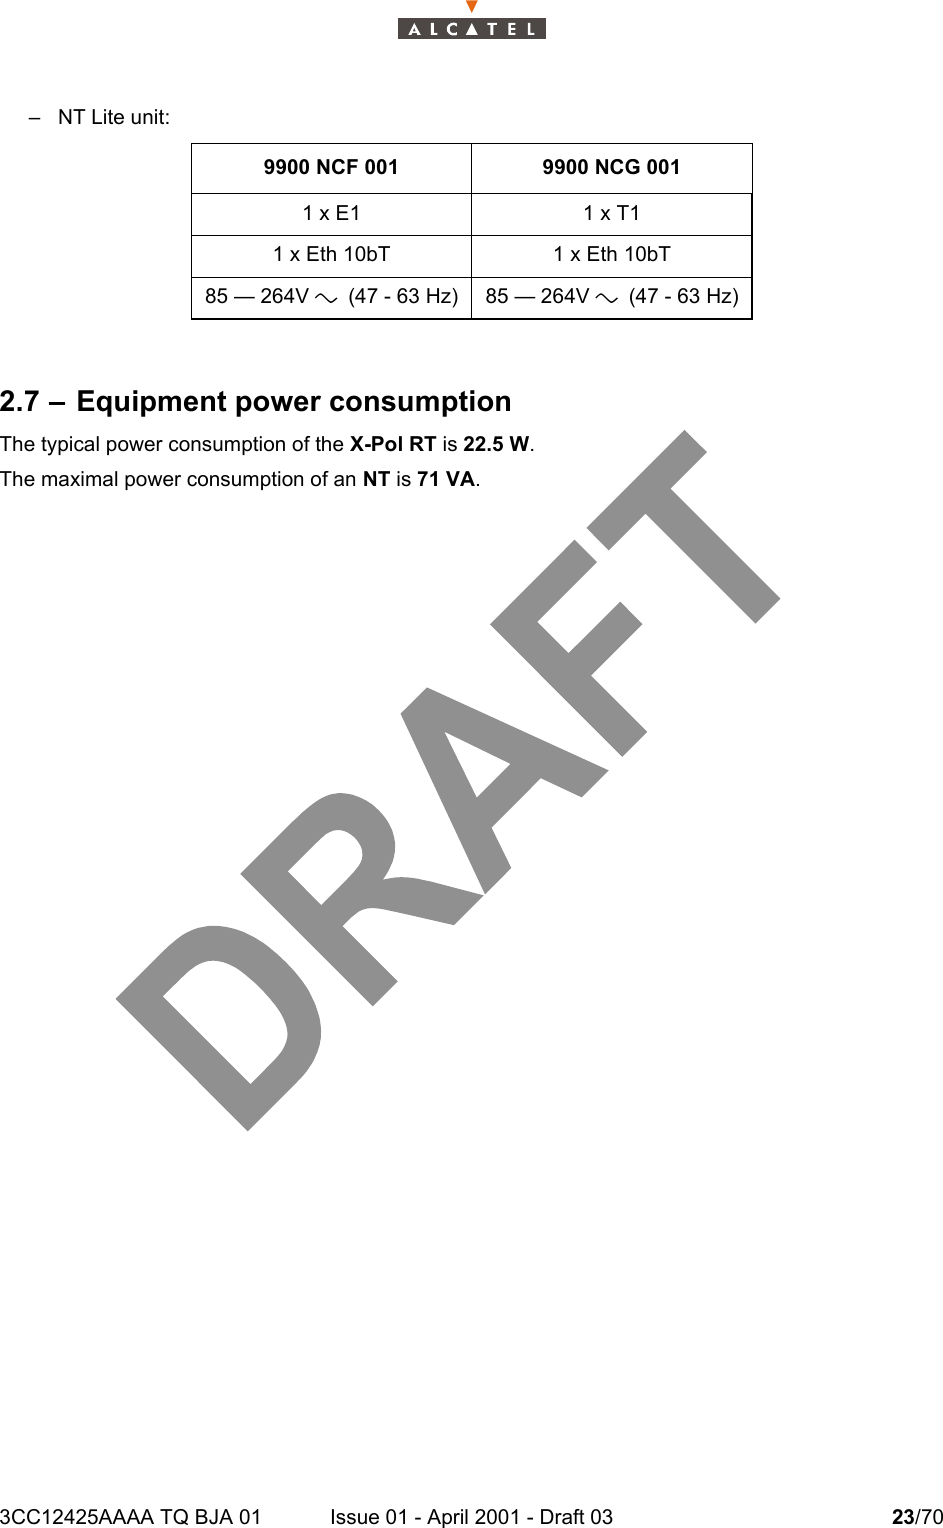 3CC12425AAAA TQ BJA 01 Issue 01 - April 2001 - Draft 03 23/7024– NT Lite unit:2.7 – Equipment power consumptionThe typical power consumption of the X-Pol RT is 22.5 W.The maximal power consumption of an NT is 71 VA.9900 NCF 001 9900 NCG 0011 x E1 1 x T11 x Eth 10bT 1 x Eth 10bT85 — 264V a (47 - 63 Hz) 85 — 264V a (47 - 63 Hz)